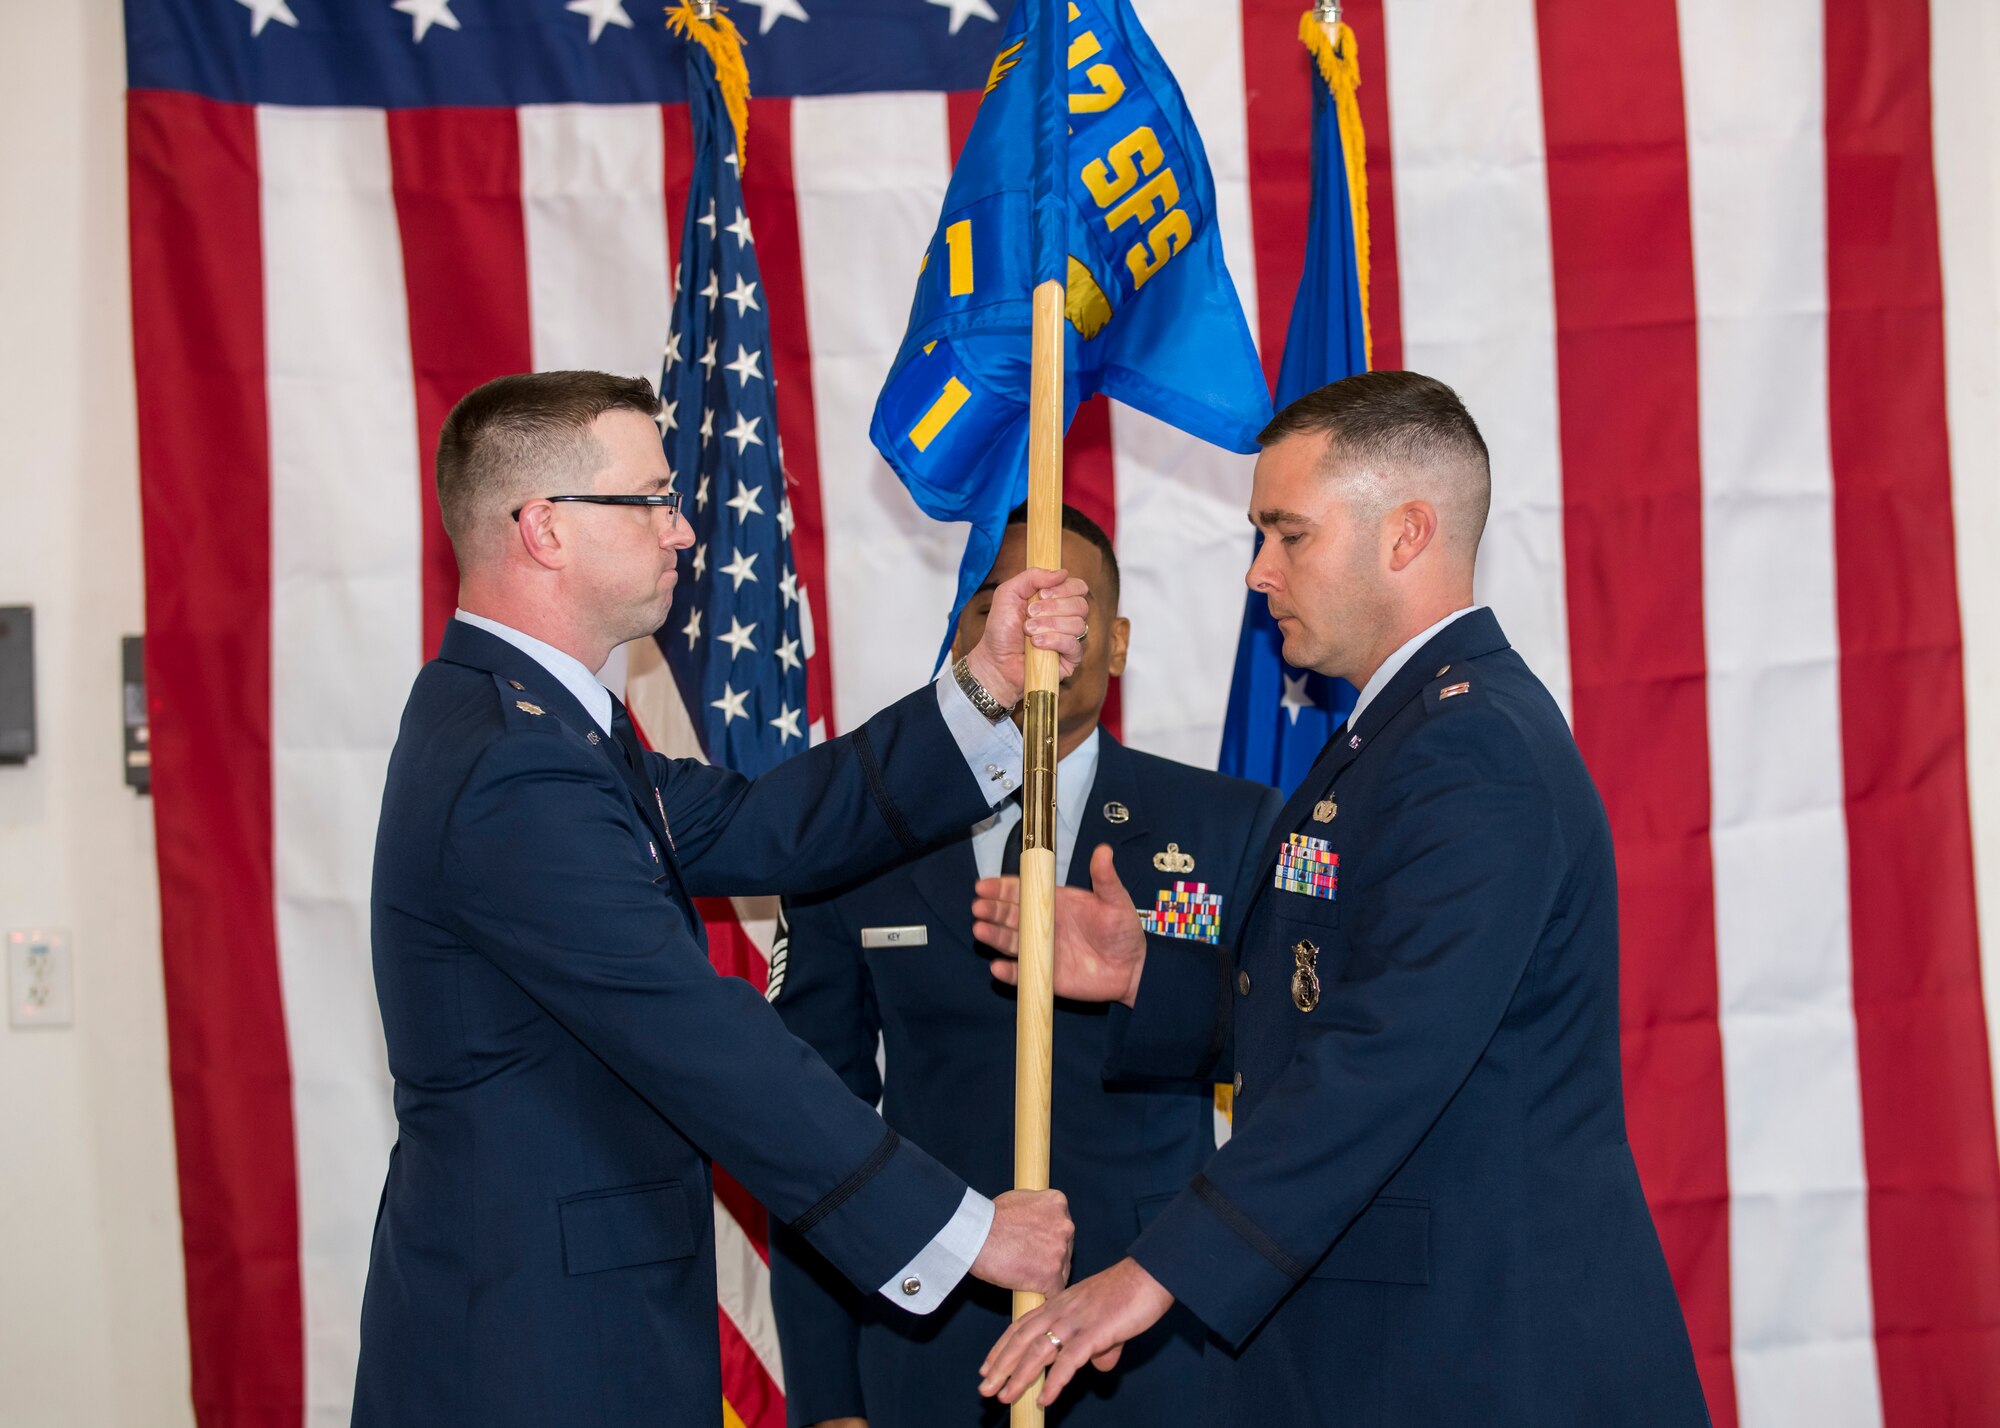 Lt. Col. Joseph Bincarousky, 412th Security Forces Squadron Commander, hands Detachment 1’s guidon to Capt. Daniel Parsons signifying his assumption of command and activation of the unit at 412th Test Wing Operation Location Plant 42 in Palmdale, California, Feb. 13. (Air Force photo by Giancarlo Casem)